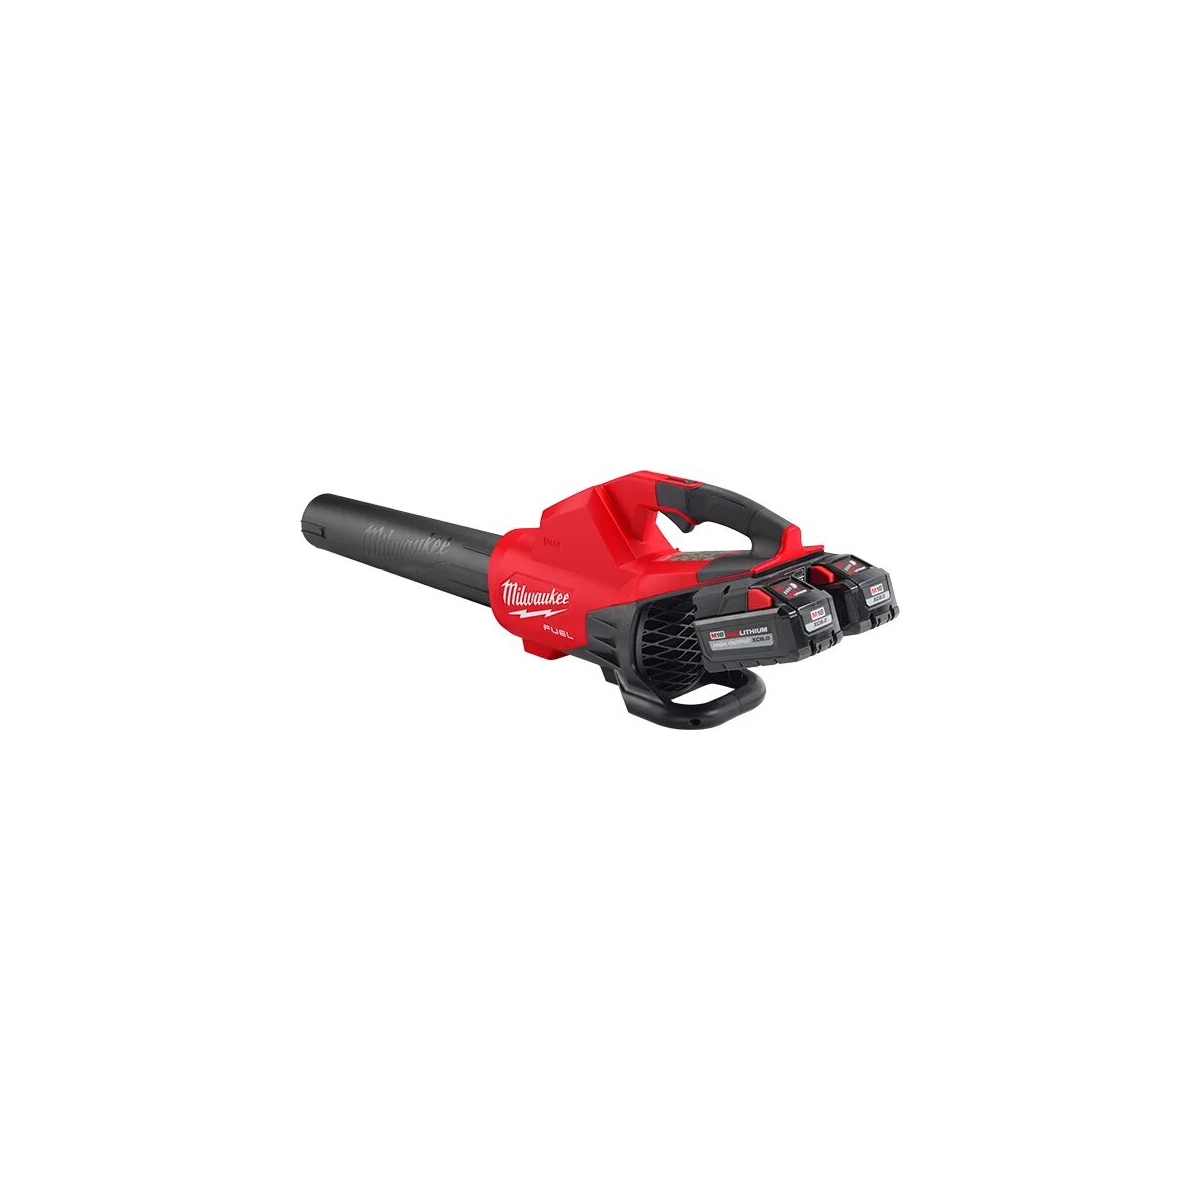 https://www.toomanytools.com/35245-thickbox_default/milwaukee-m18-f2bl-0-souffleur-brushless-18v-fuel-a-double-batteries-4933479987.jpg